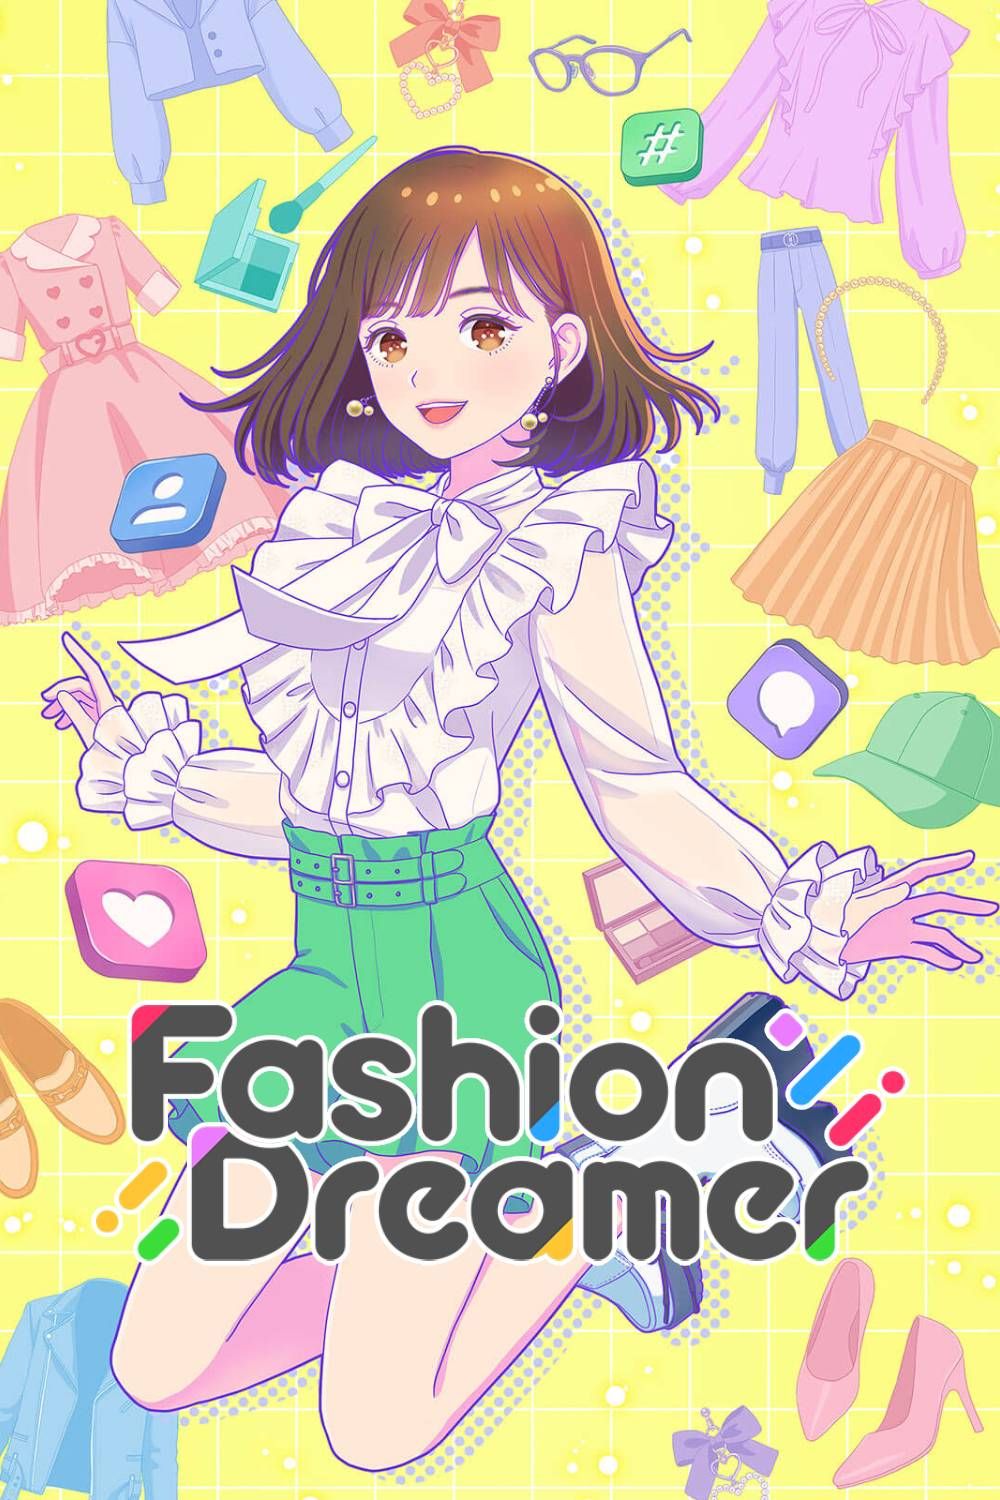 Build Your Own Brand and Become the Ultimate Influencer in Fashion Dreamer,  Coming to Nintendo Switch in 2023